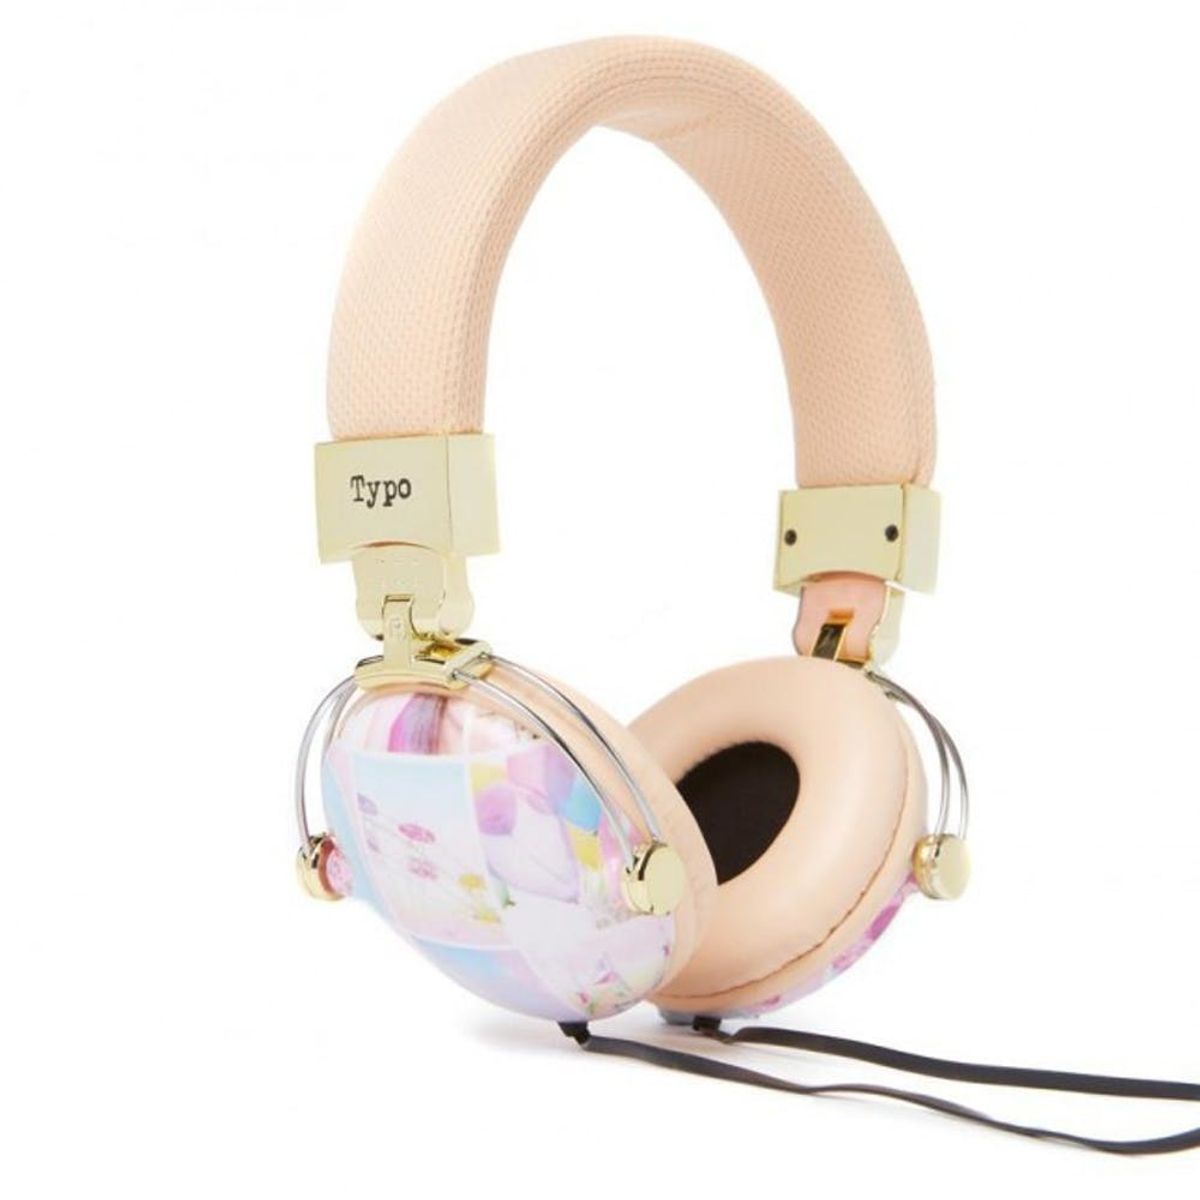 10 Stylish Headphones to Rock on Your Commute